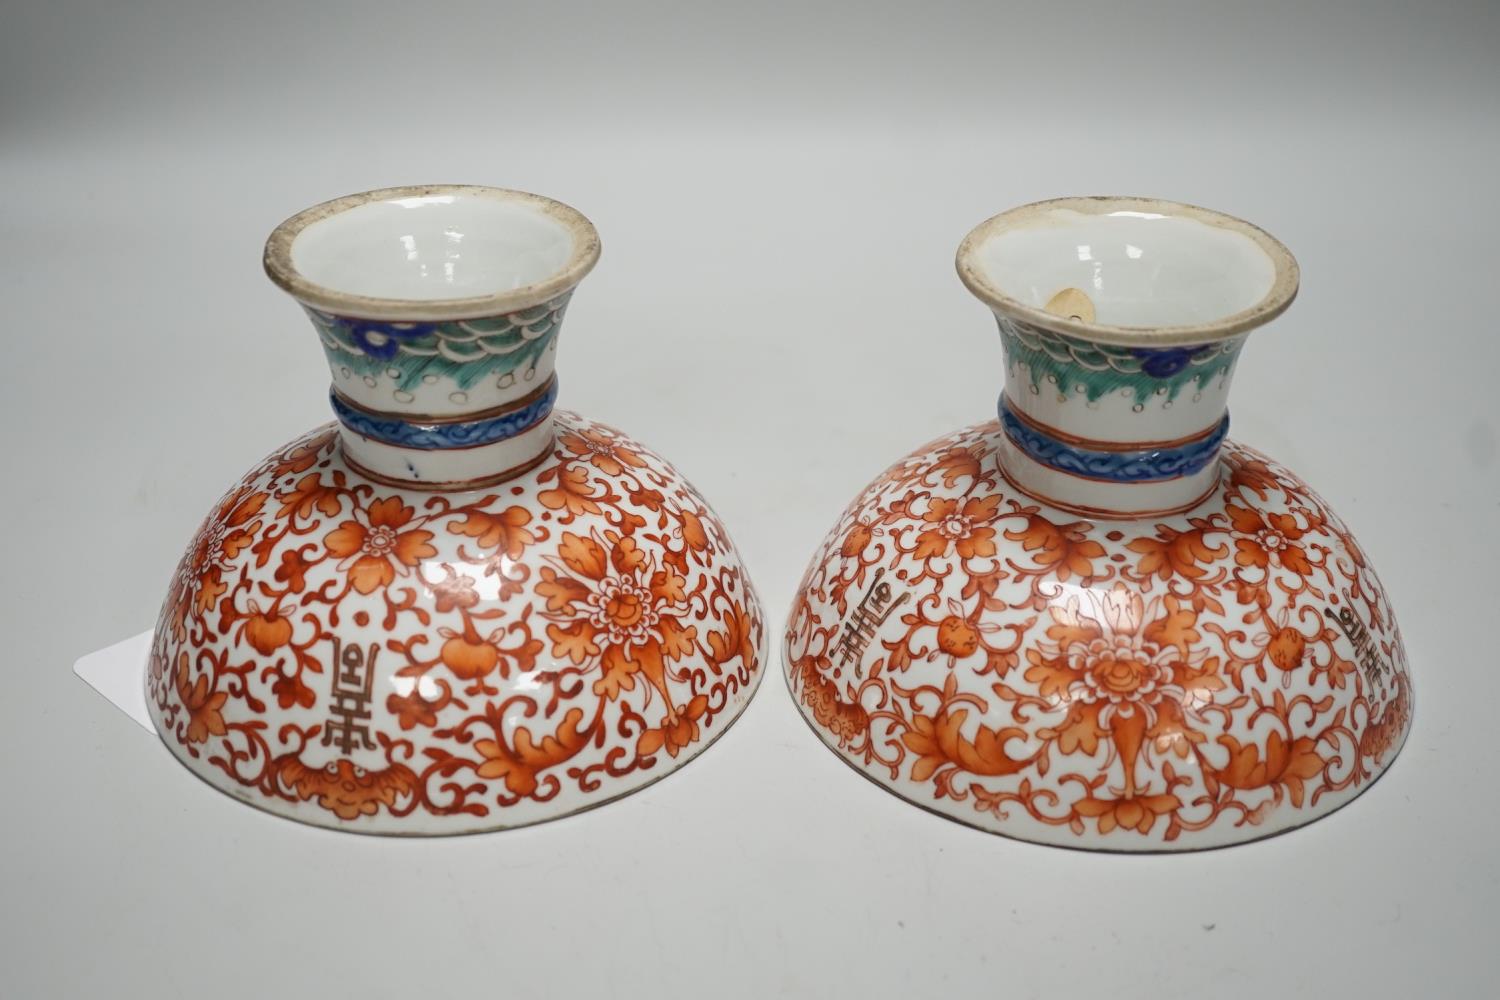 A large pair of 19th century Chinese stem bowls, painted with bats, Shou and lotus flowers, 12cm - Image 4 of 5